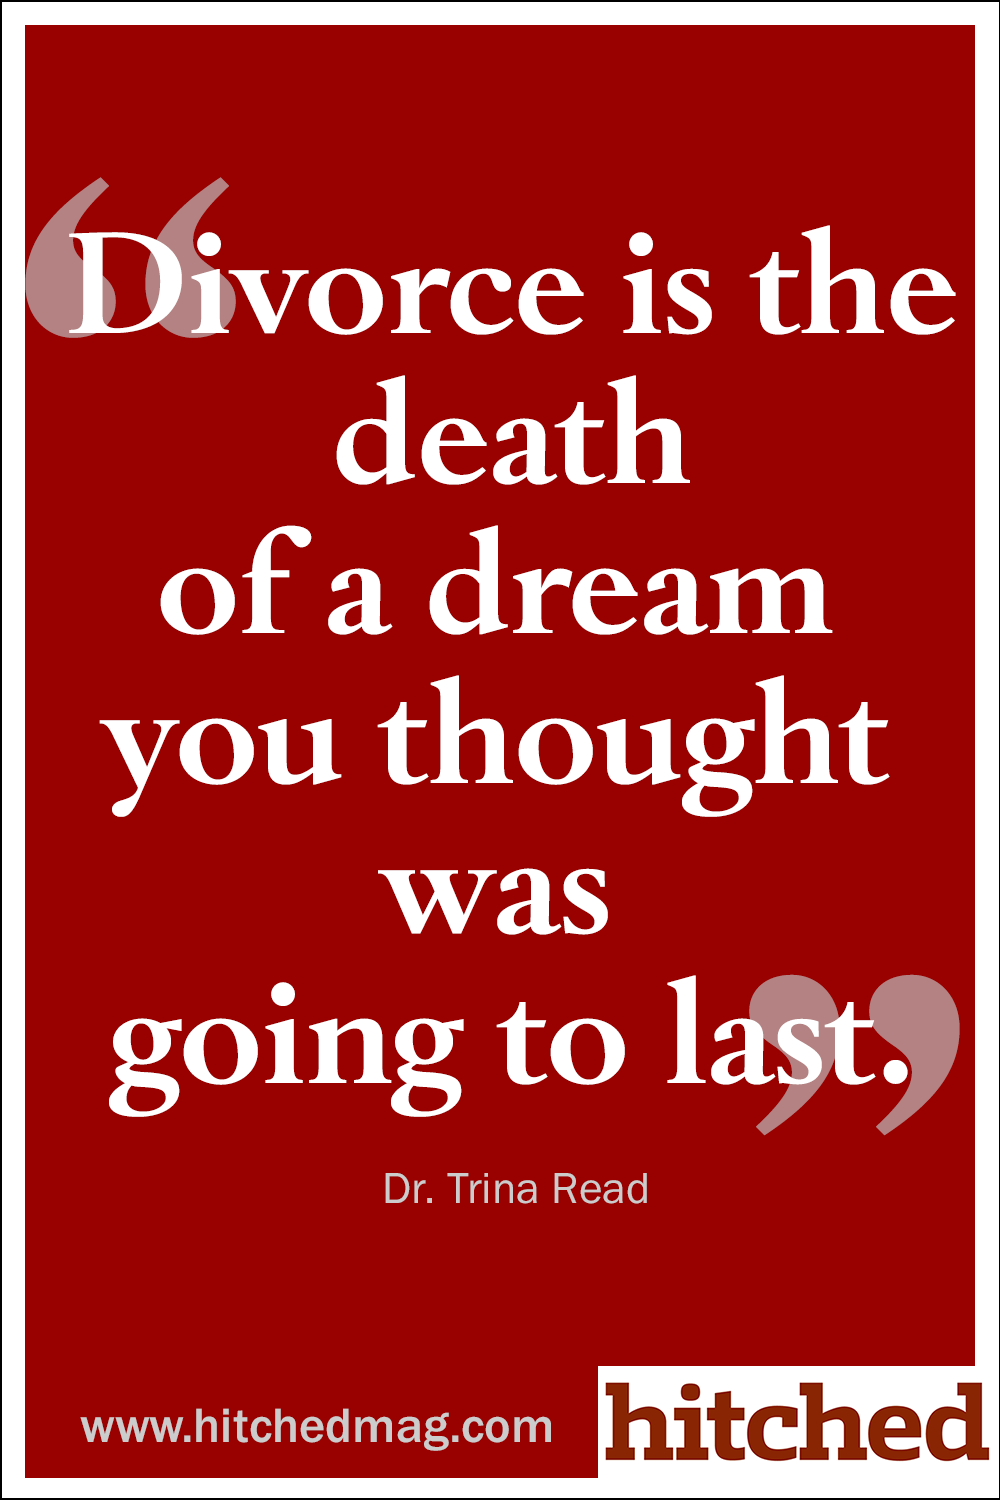 Divorce is the death of a dream you thought was going to last.